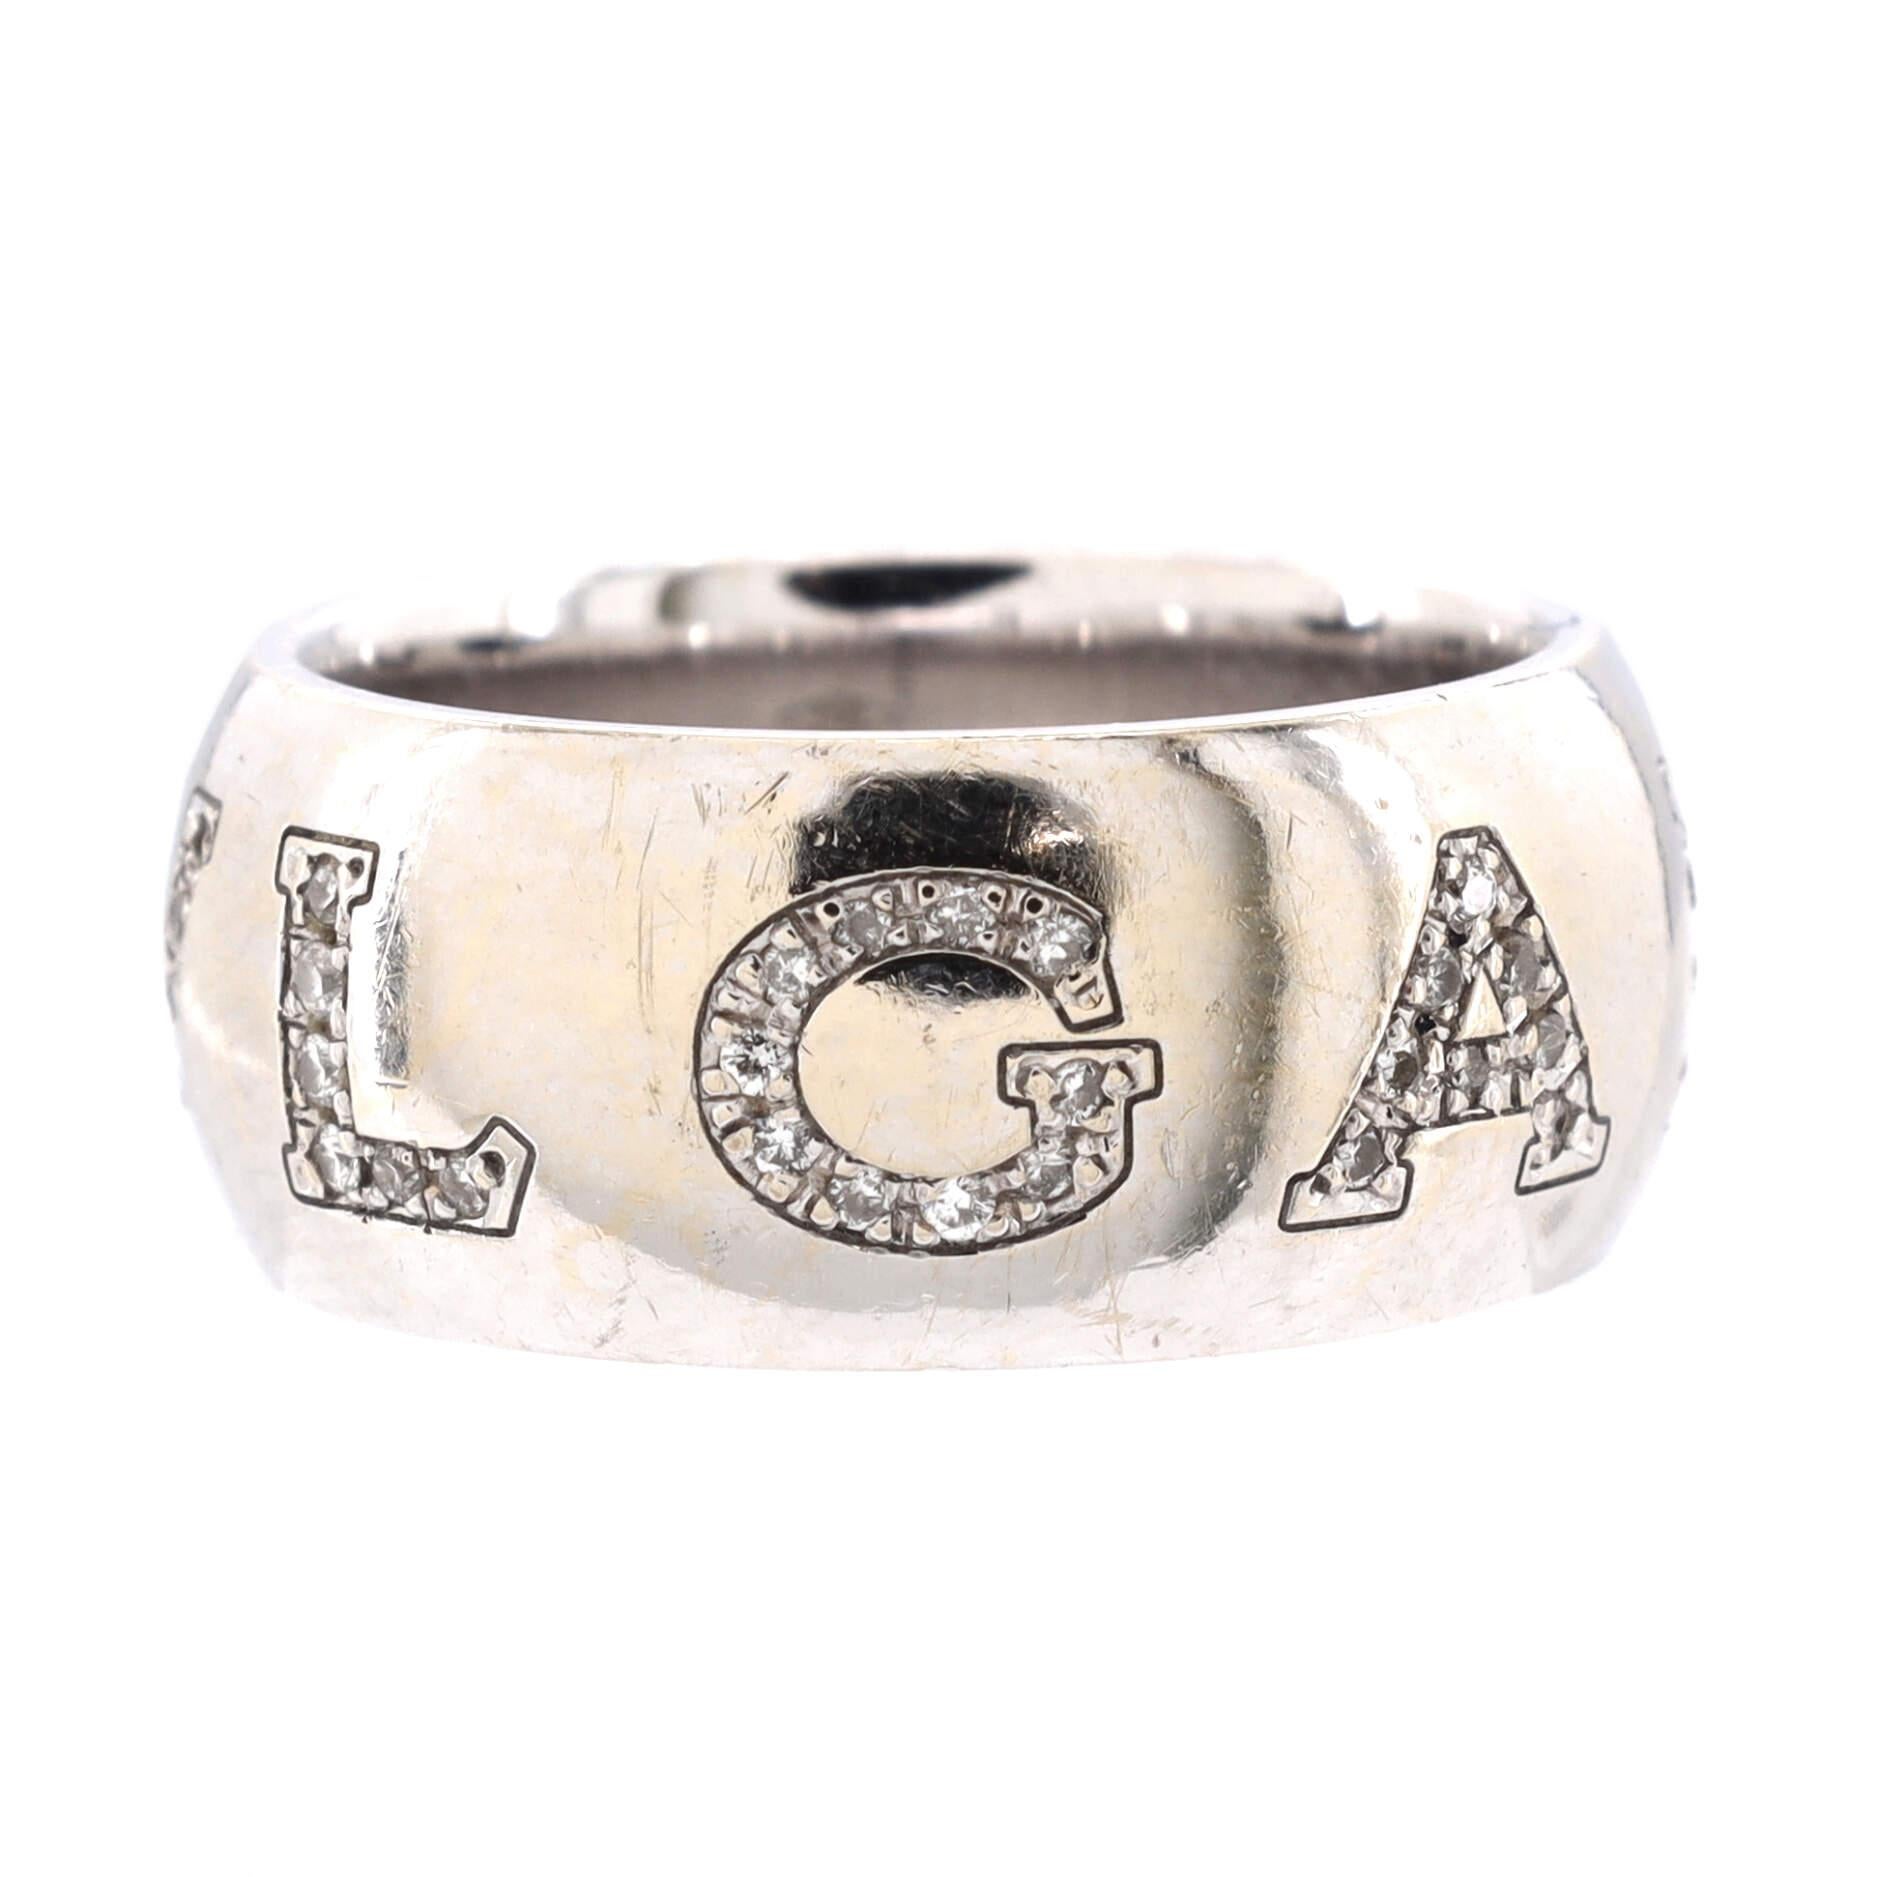 Condition: Good. Moderately heavy wear throughout.
Accessories: No Accessories
Measurements: Size: 6 - 52, Width: 9.10 mm
Designer: Bvlgari
Model: Monologo Ring 18K White Gold with Diamonds
Exterior Color: White Gold
Item Number: 188470/21